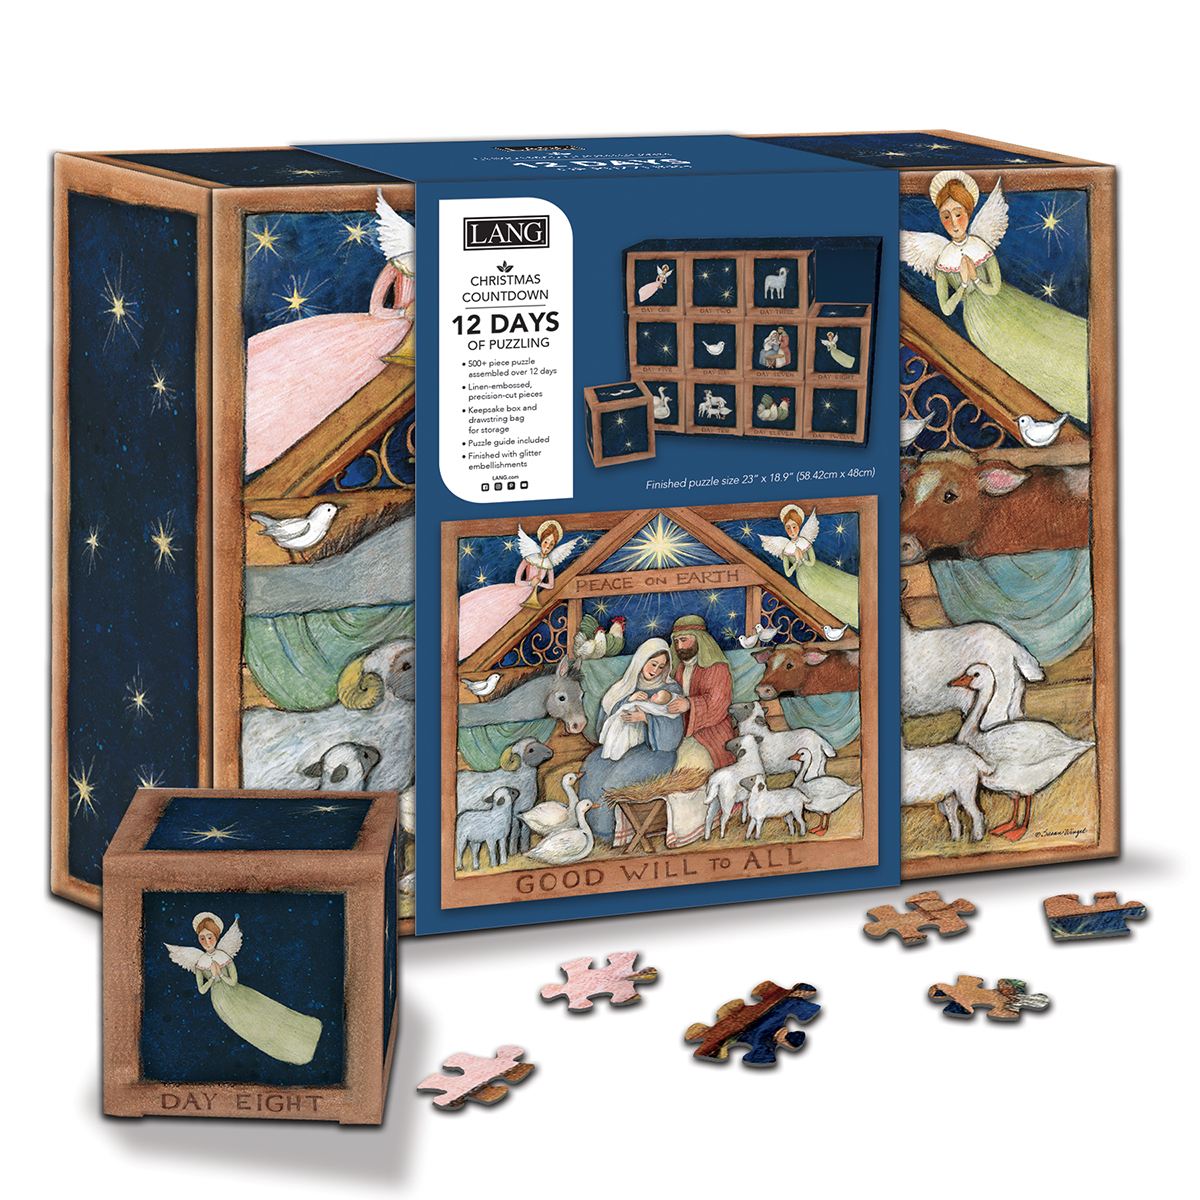 LANG 12 Days of Puzzling Christmas Countdown-Good Will To All by Susan Winget 
															/ The LANG Companies							